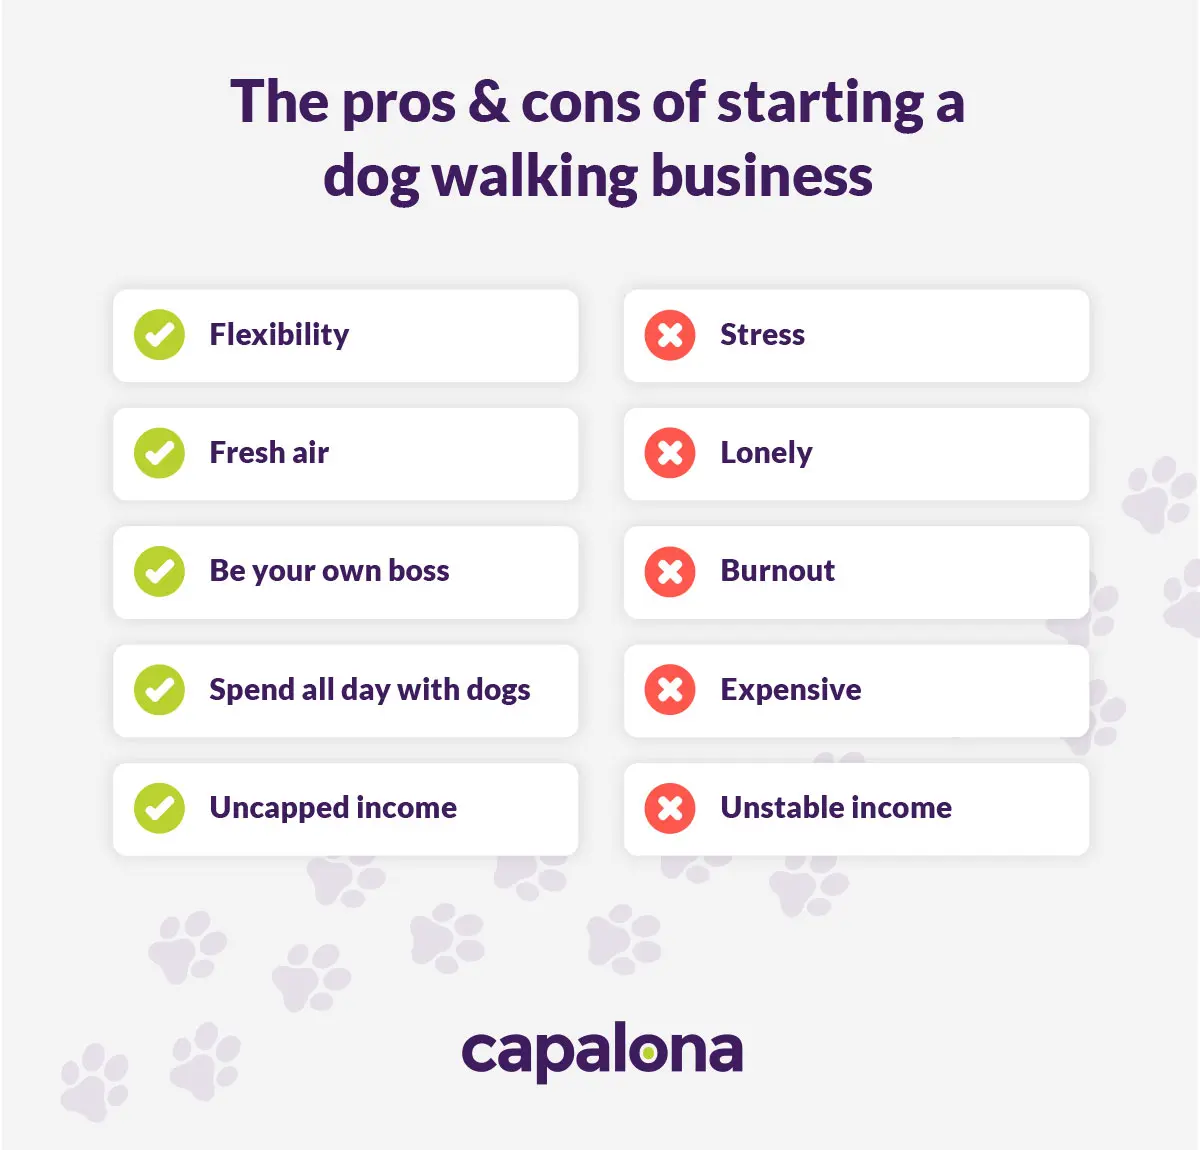 The pros and cons of starting a dog walking business